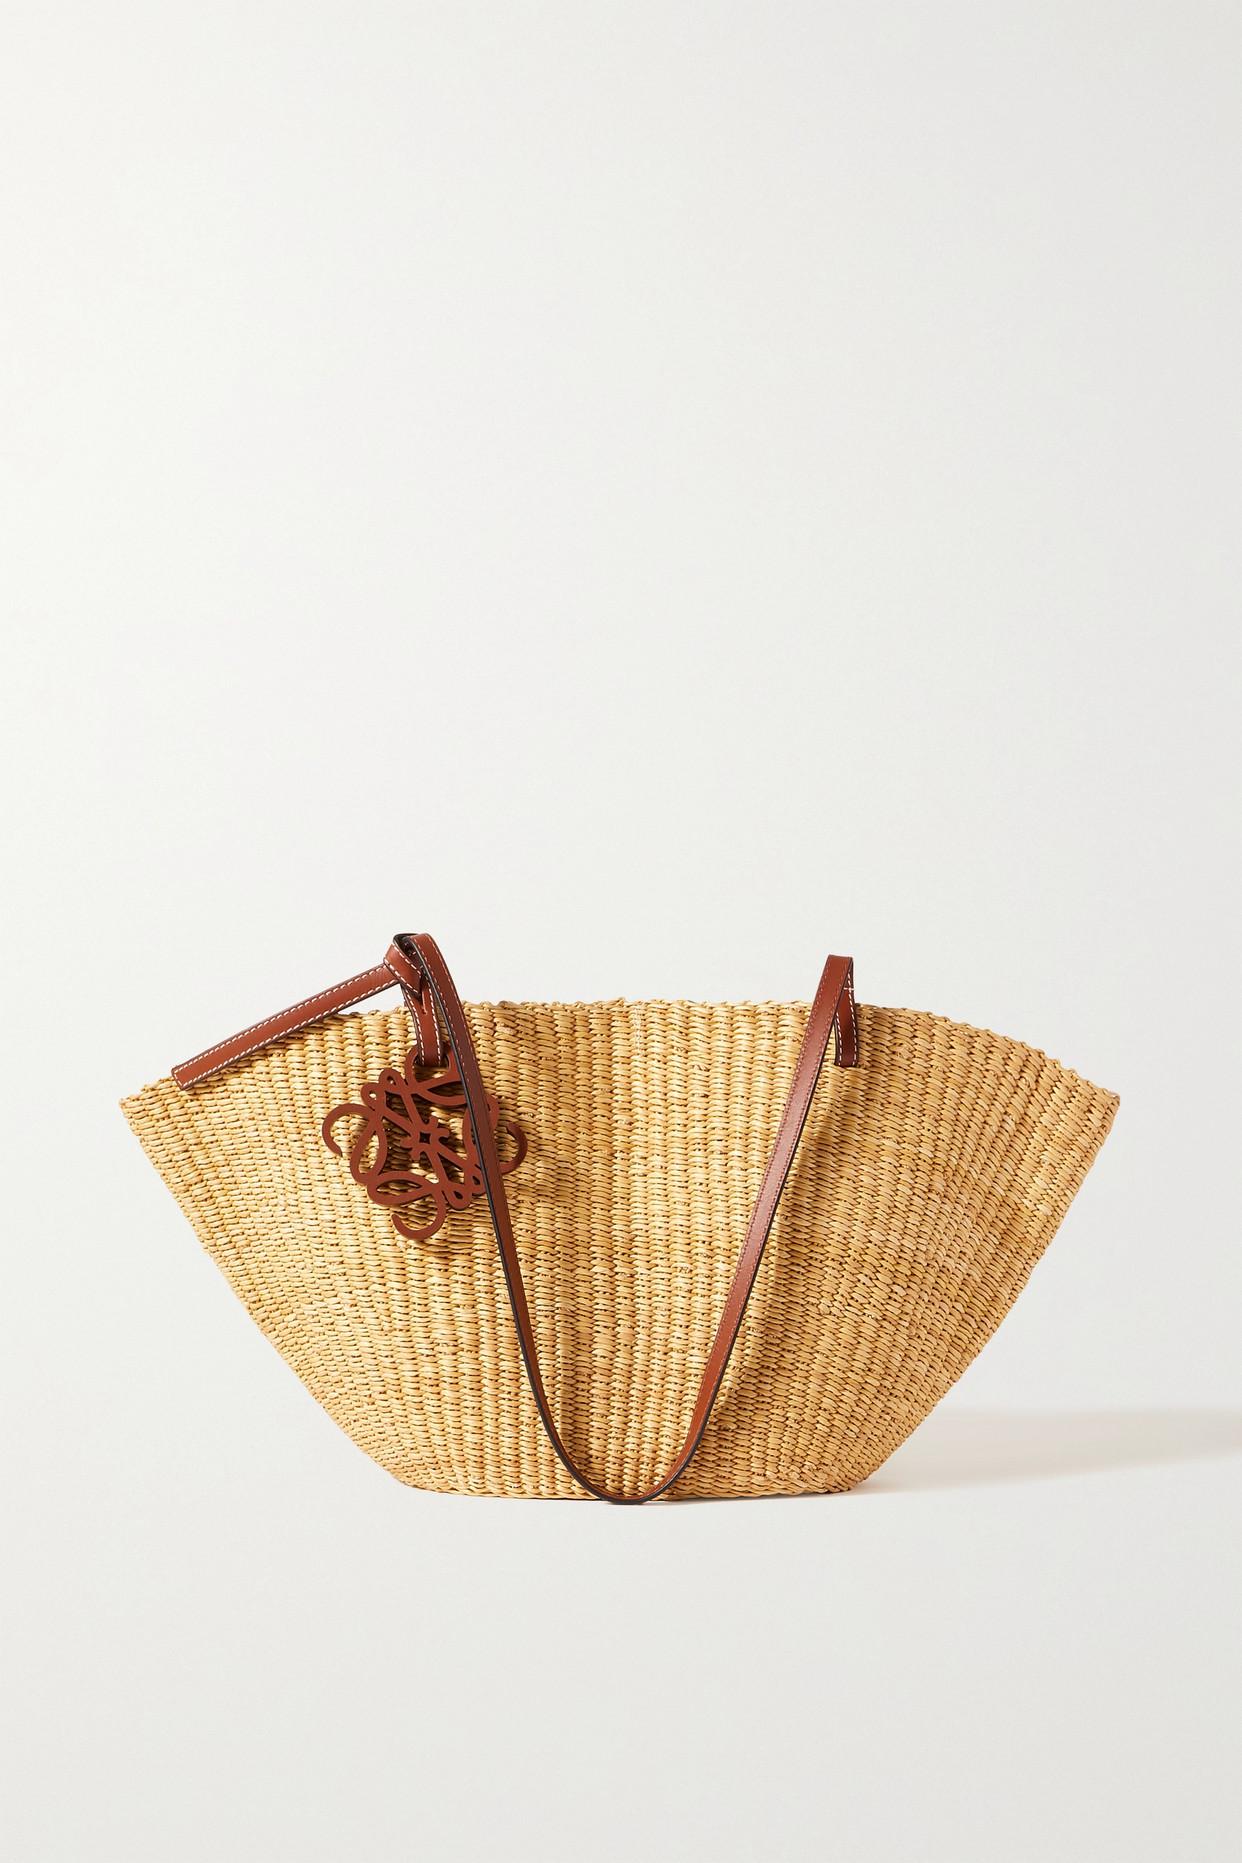 Loewe Shell Small Leather-trimmed Raffia Tote in Brown | Lyst